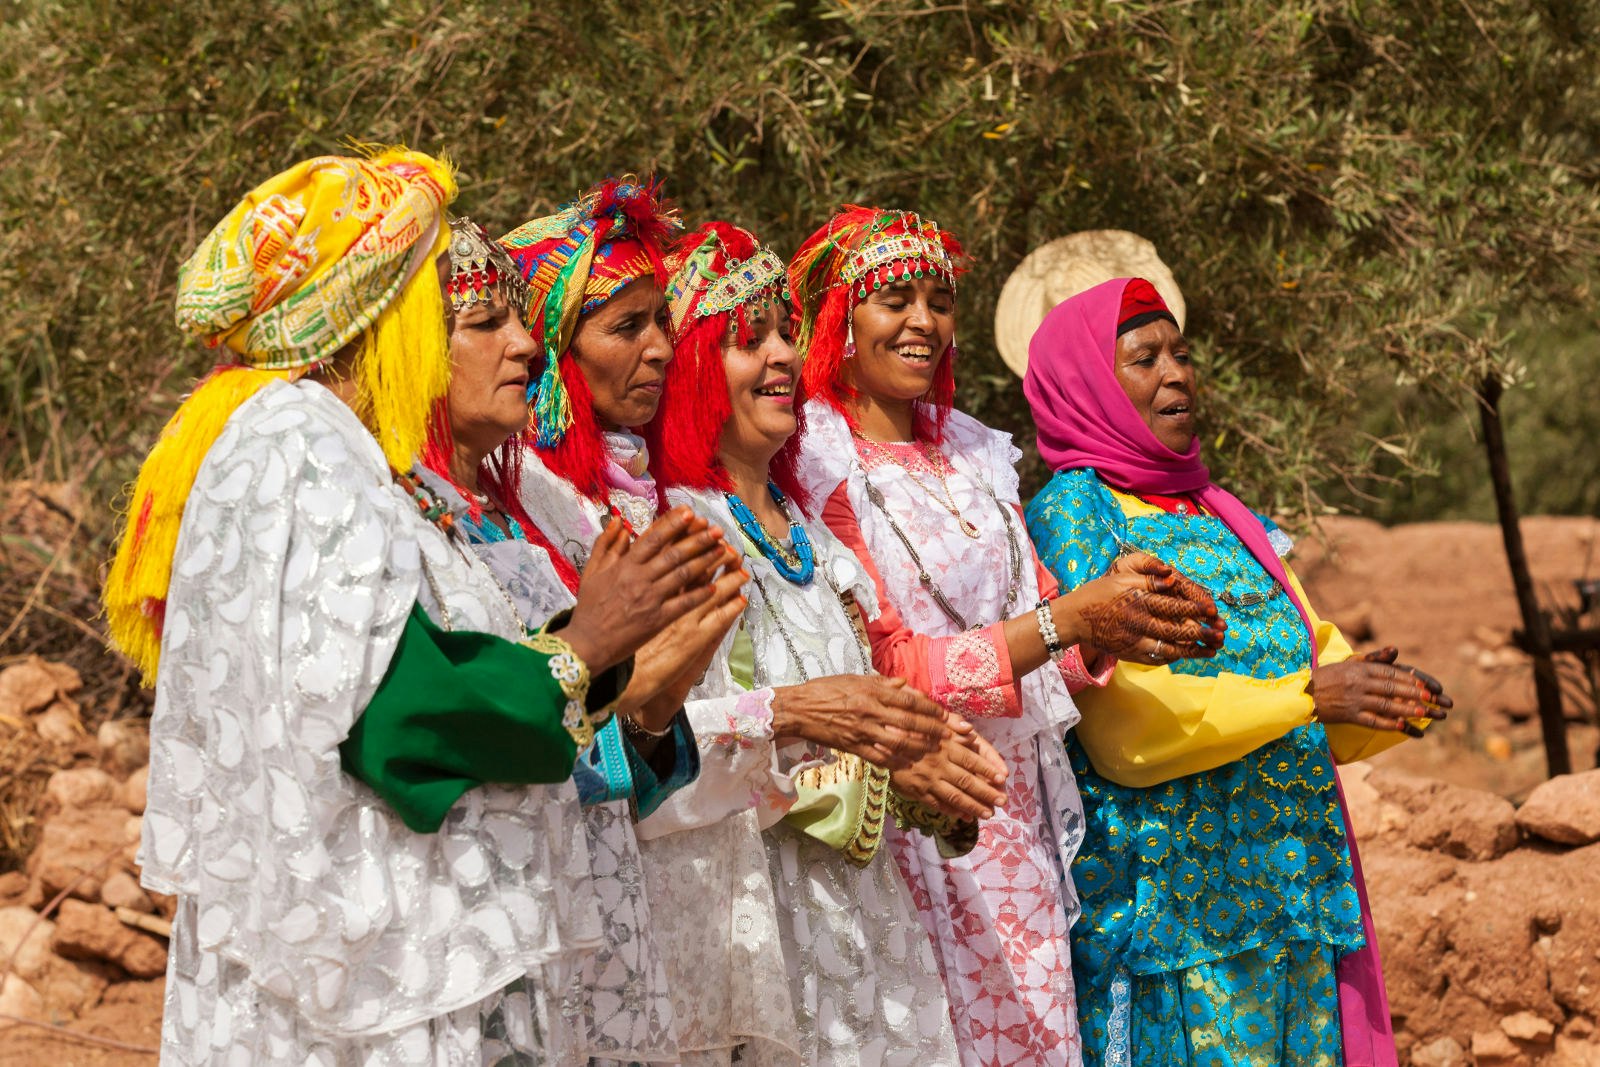 Six Berber women stand in a line at a wedding ceremony, dressed in colourful clothing